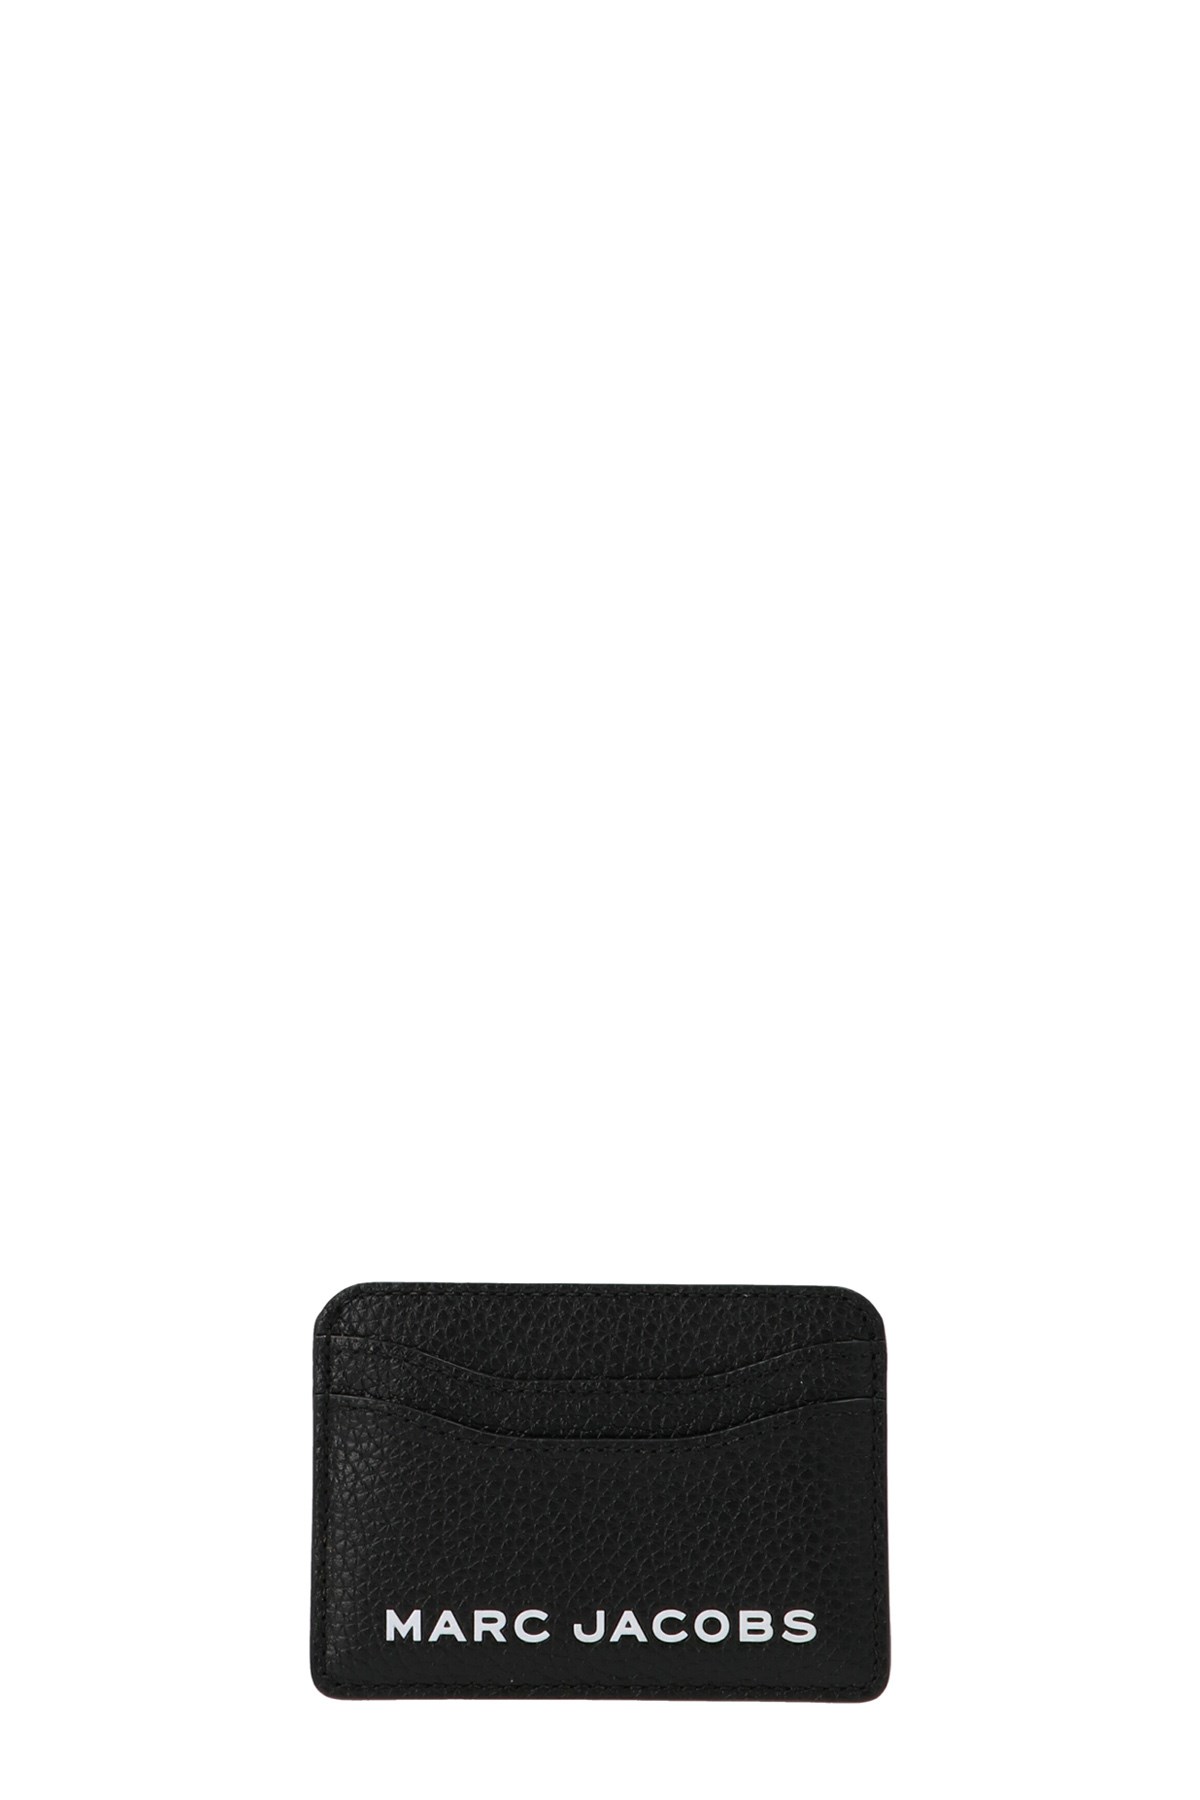 MARC JACOBS 'The Bold New Card’ Card Holder